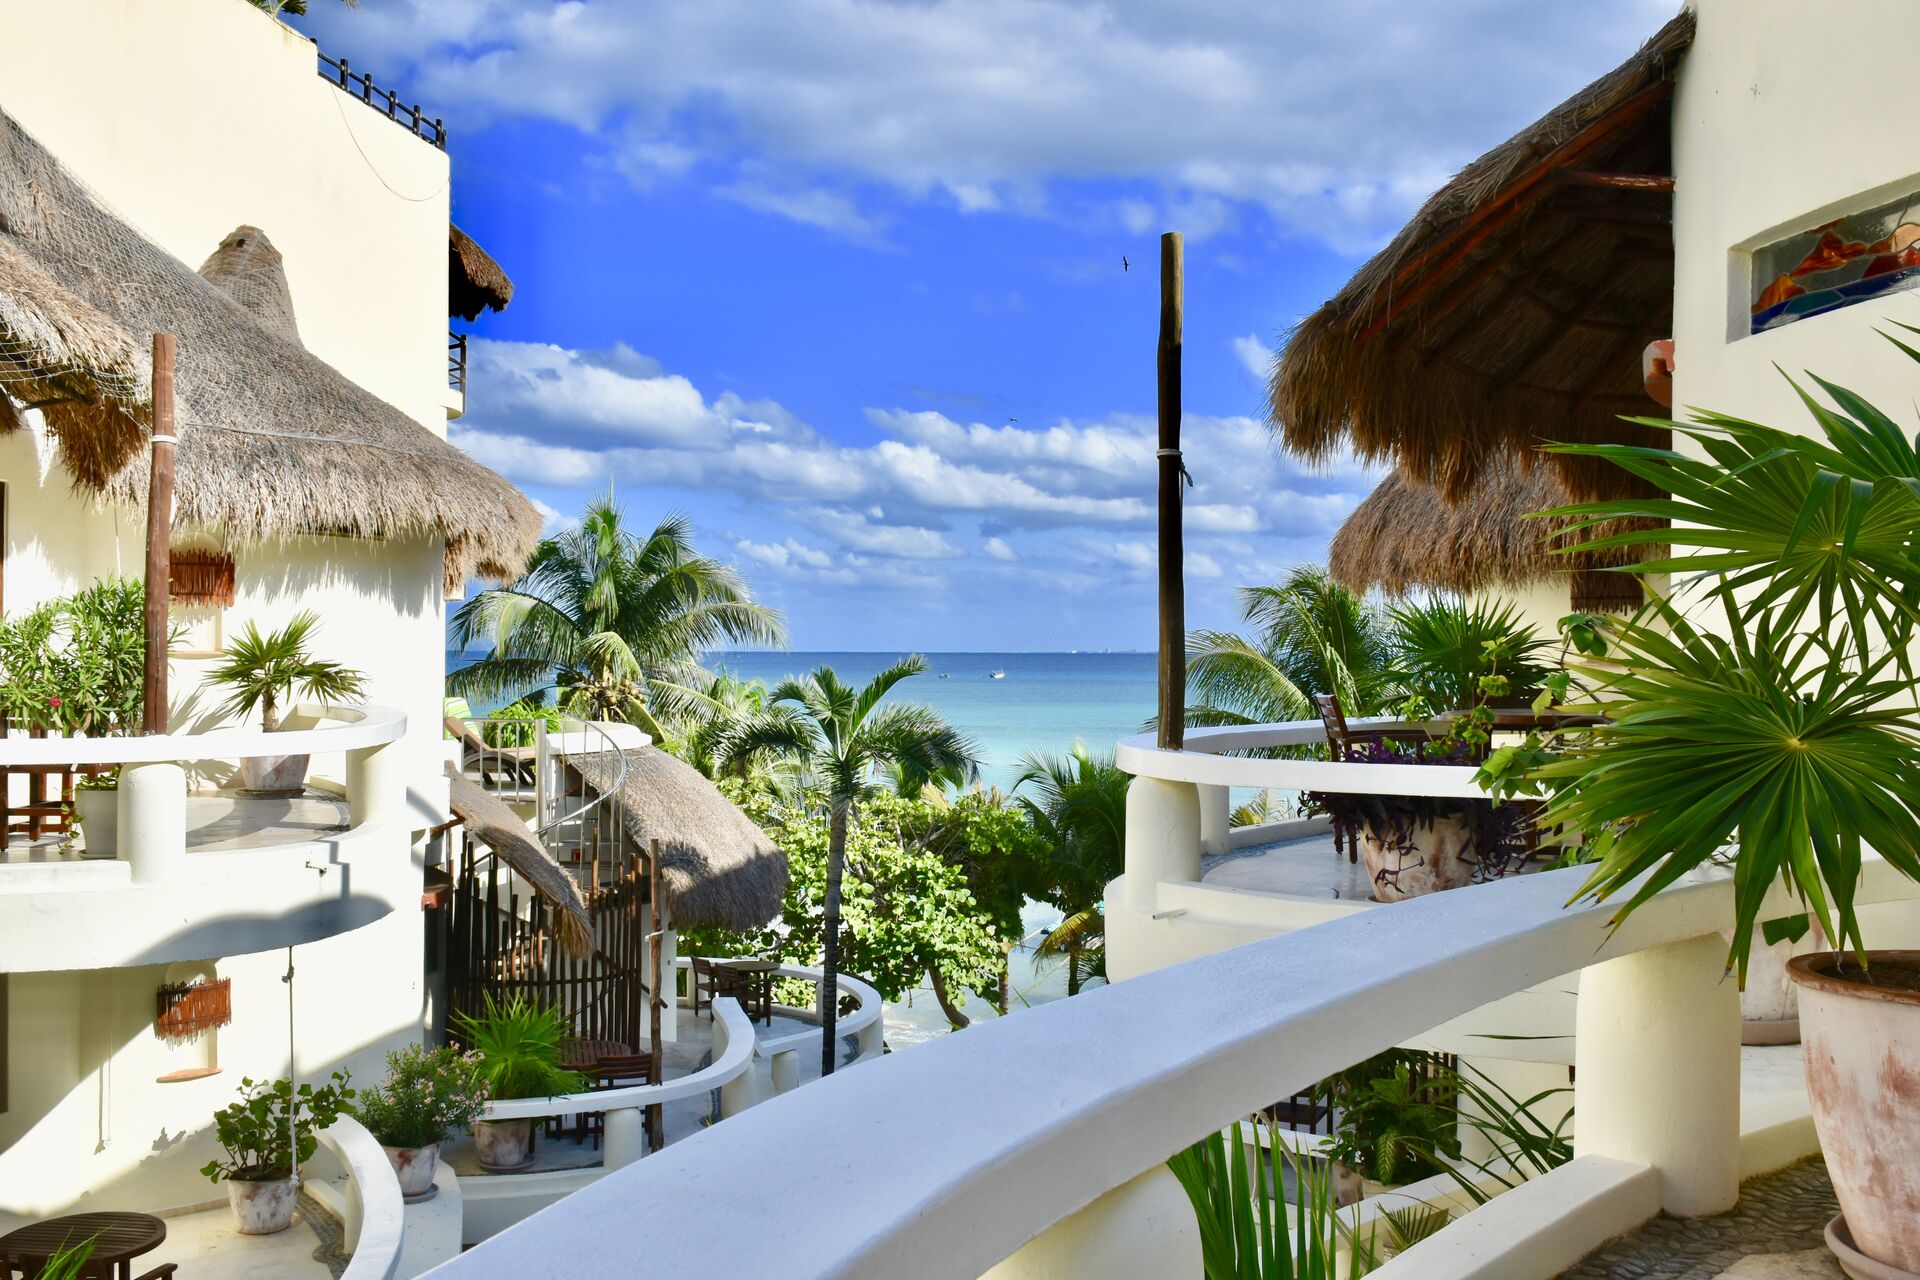 Amazing ocean view from your balcony.